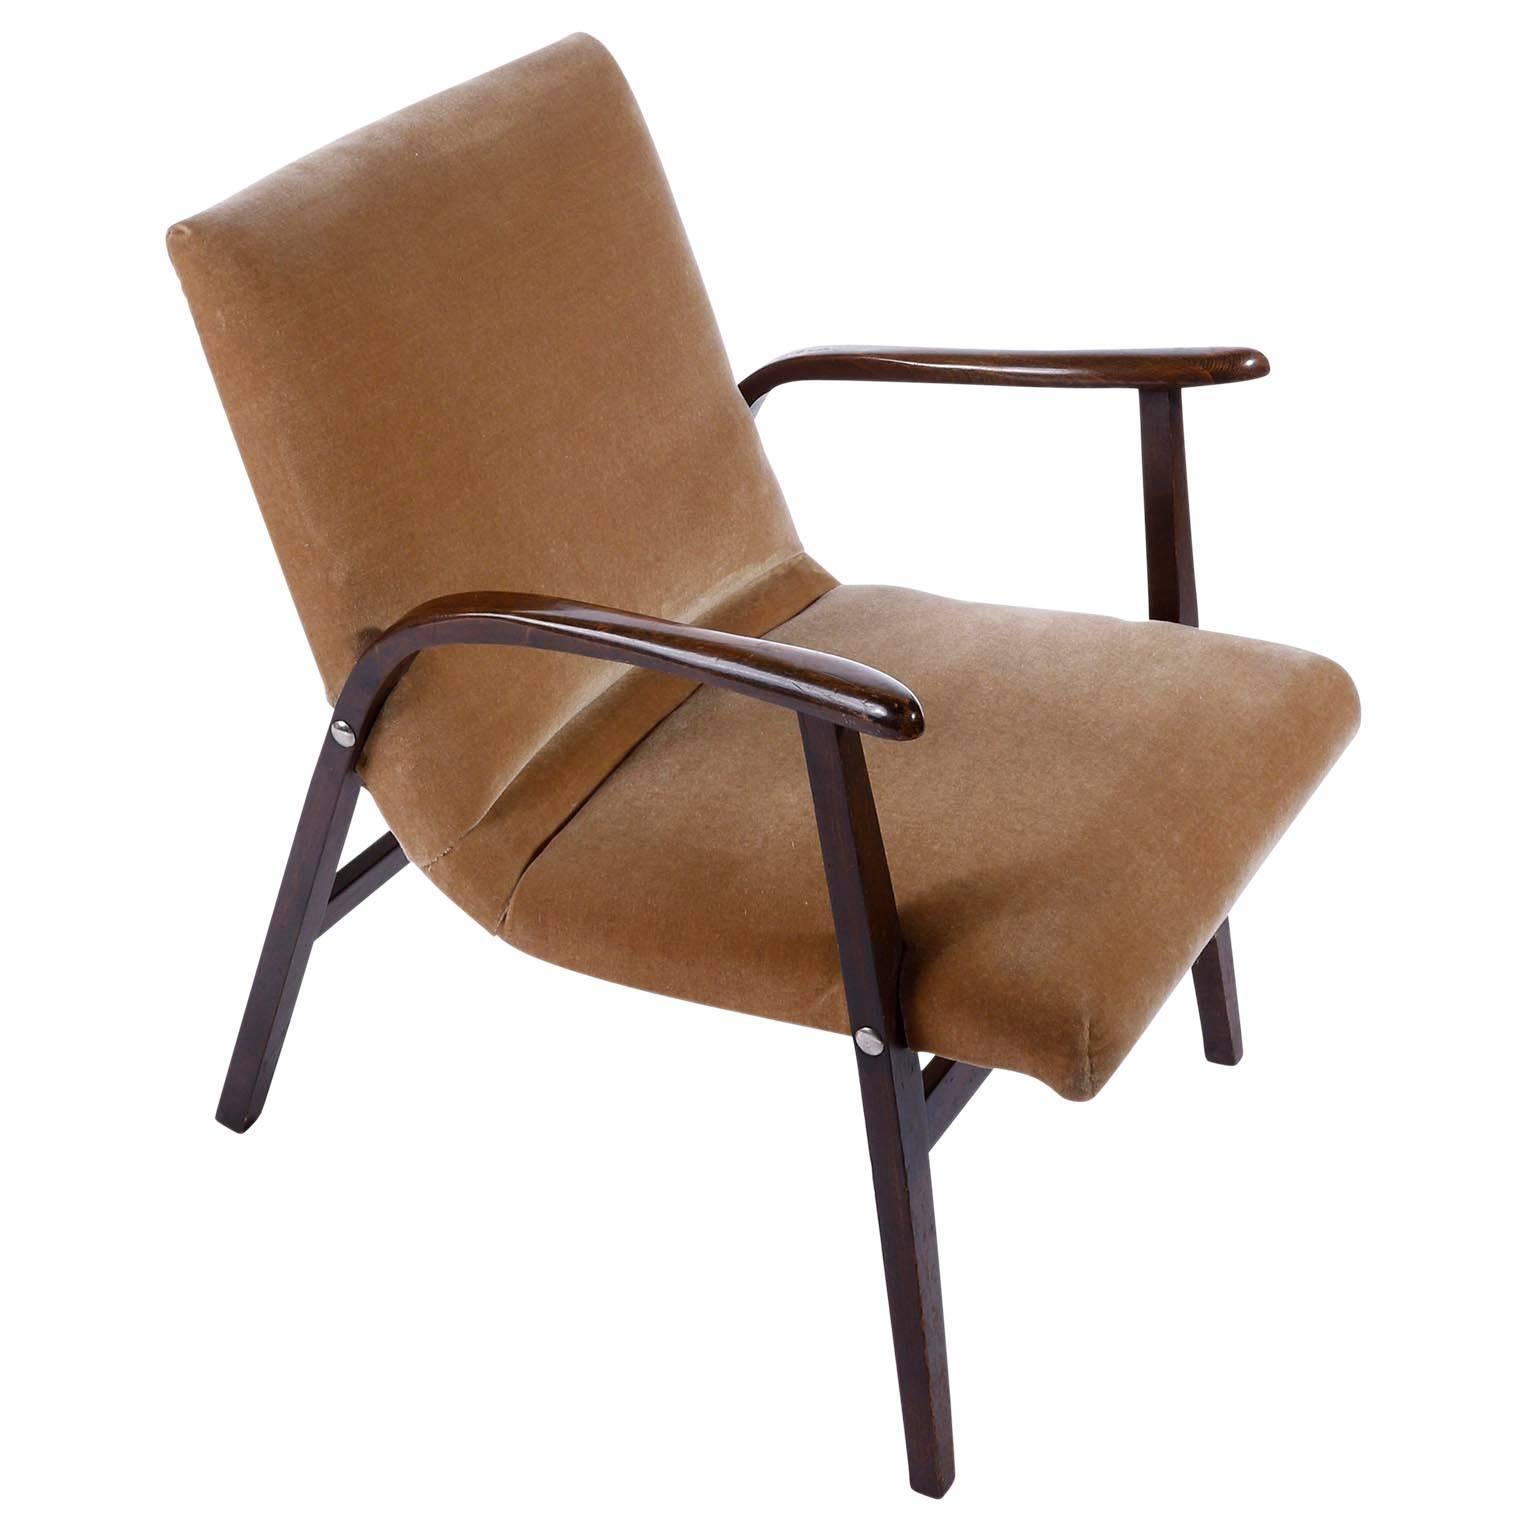 Stained Pair of Roland Rainer Lounge Chairs Armchairs Cafe Ritter, Velvet Wood, 1950s For Sale